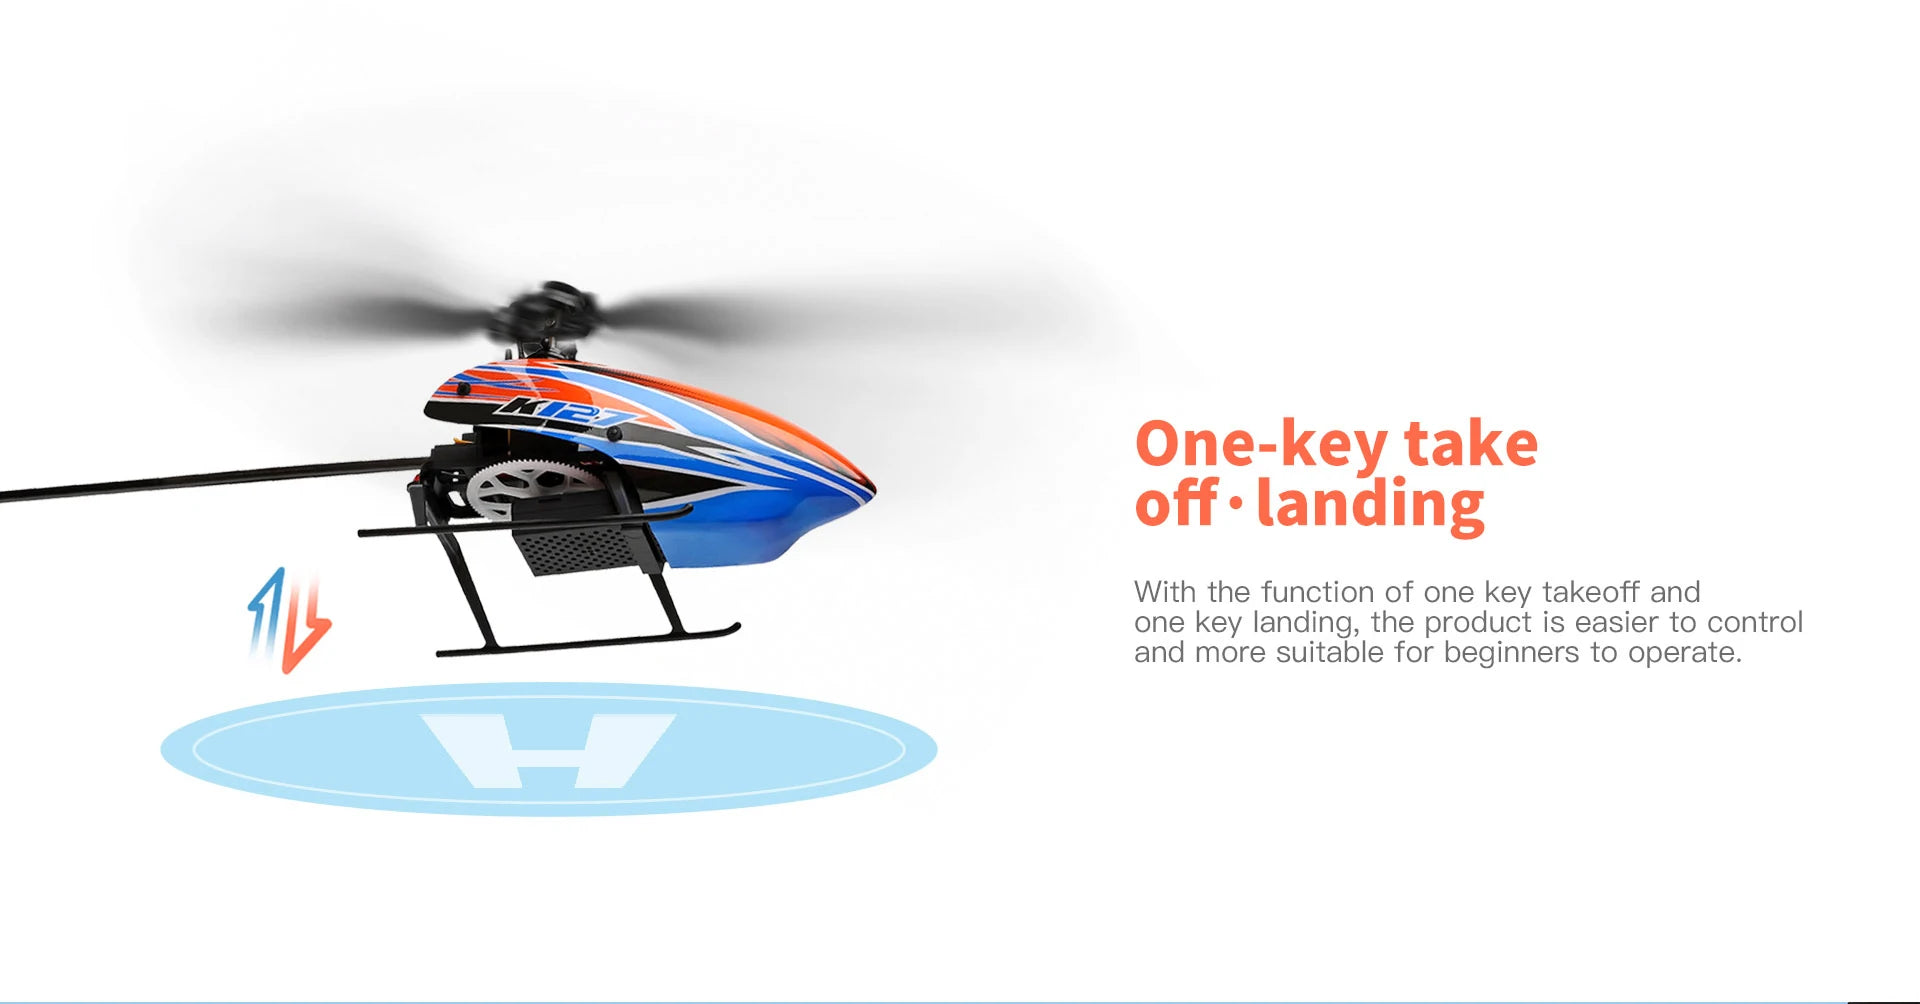 Wltoys K127 Rc Helicopter, one-key take off - landing The product is easier to control and more suitable for beginners